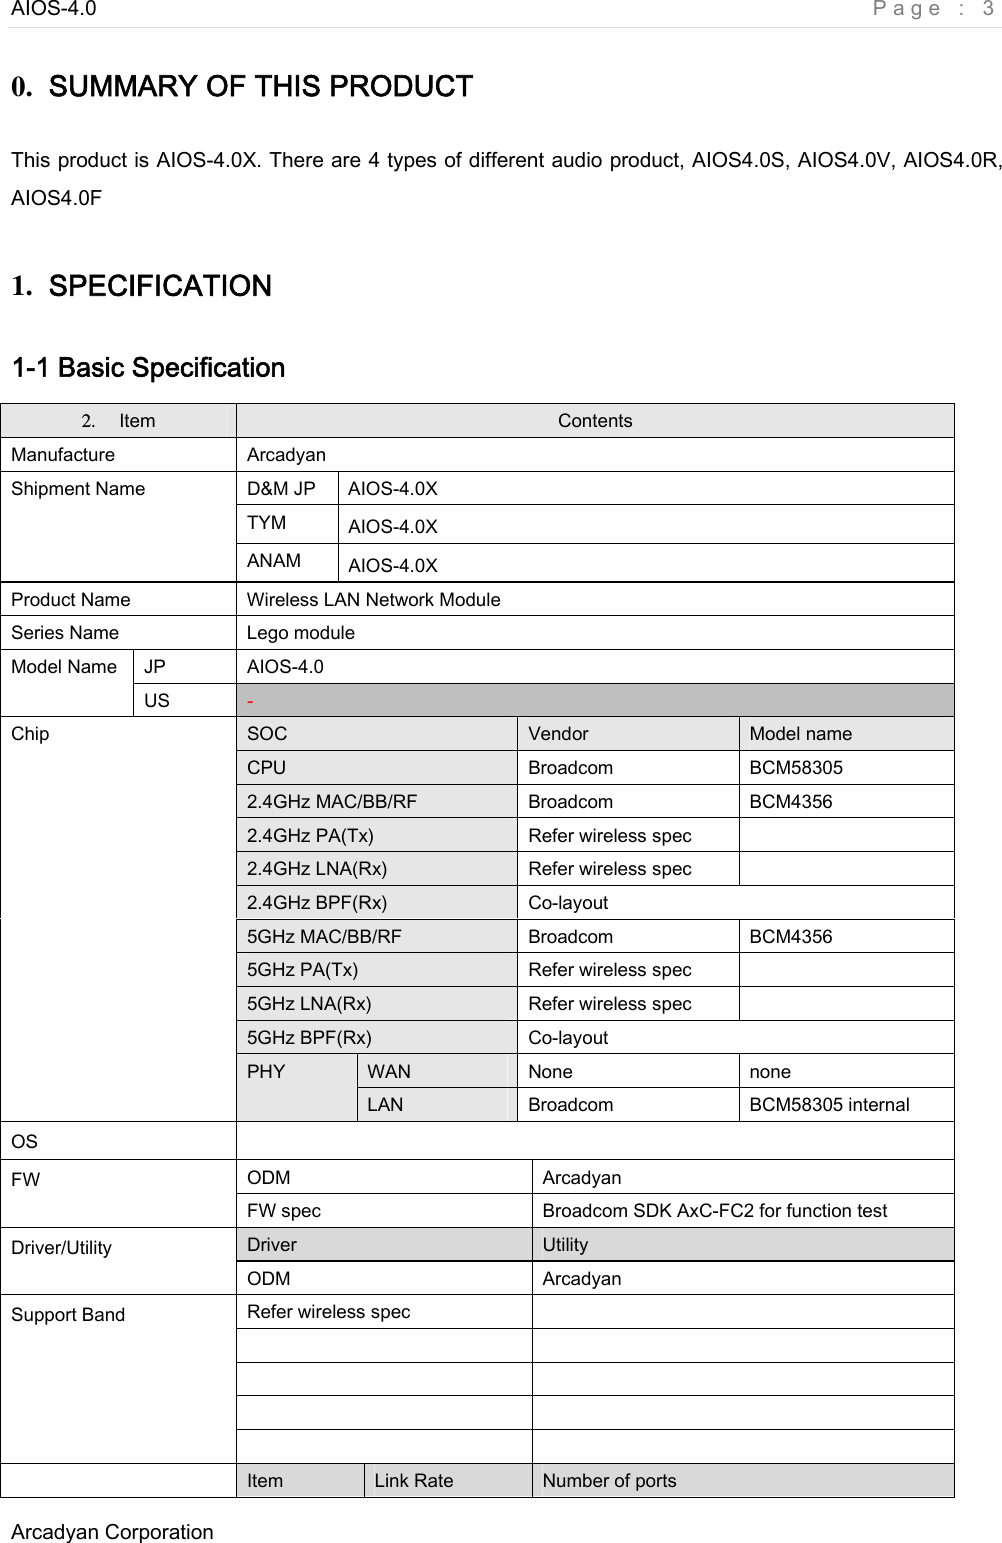 AIOS-4.0    Page : 3 Arcadyan Corporation     0.  SUMMARY OF THIS PRODUCT This product is AIOS-4.0X. There are 4 types of different audio product, AIOS4.0S, AIOS4.0V, AIOS4.0R, AIOS4.0F 1.  SPECIFICATION 1-1 Basic Specification 2.  Item  Contents Manufacture  Arcadyan D&amp;M JP  AIOS-4.0X TYM  AIOS-4.0X Shipment Name ANAM  AIOS-4.0X Product Name  Wireless LAN Network Module Series Name  Lego module JP  AIOS-4.0 Model Name US  - SOC  Vendor  Model name CPU  Broadcom  BCM58305 2.4GHz MAC/BB/RF  Broadcom  BCM4356 2.4GHz PA(Tx)  Refer wireless spec   2.4GHz LNA(Rx)  Refer wireless spec   2.4GHz BPF(Rx)  Co-layout 5GHz MAC/BB/RF  Broadcom  BCM4356 5GHz PA(Tx)  Refer wireless spec   5GHz LNA(Rx)  Refer wireless spec   5GHz BPF(Rx)  Co-layout WAN  None  none Chip PHY  LAN  Broadcom  BCM58305 internal OS   ODM  Arcadyan FW FW spec  Broadcom SDK AxC-FC2 for function test Driver  Utility Driver/Utility ODM  Arcadyan Refer wireless spec         Support Band   Item  Link Rate  Number of ports 